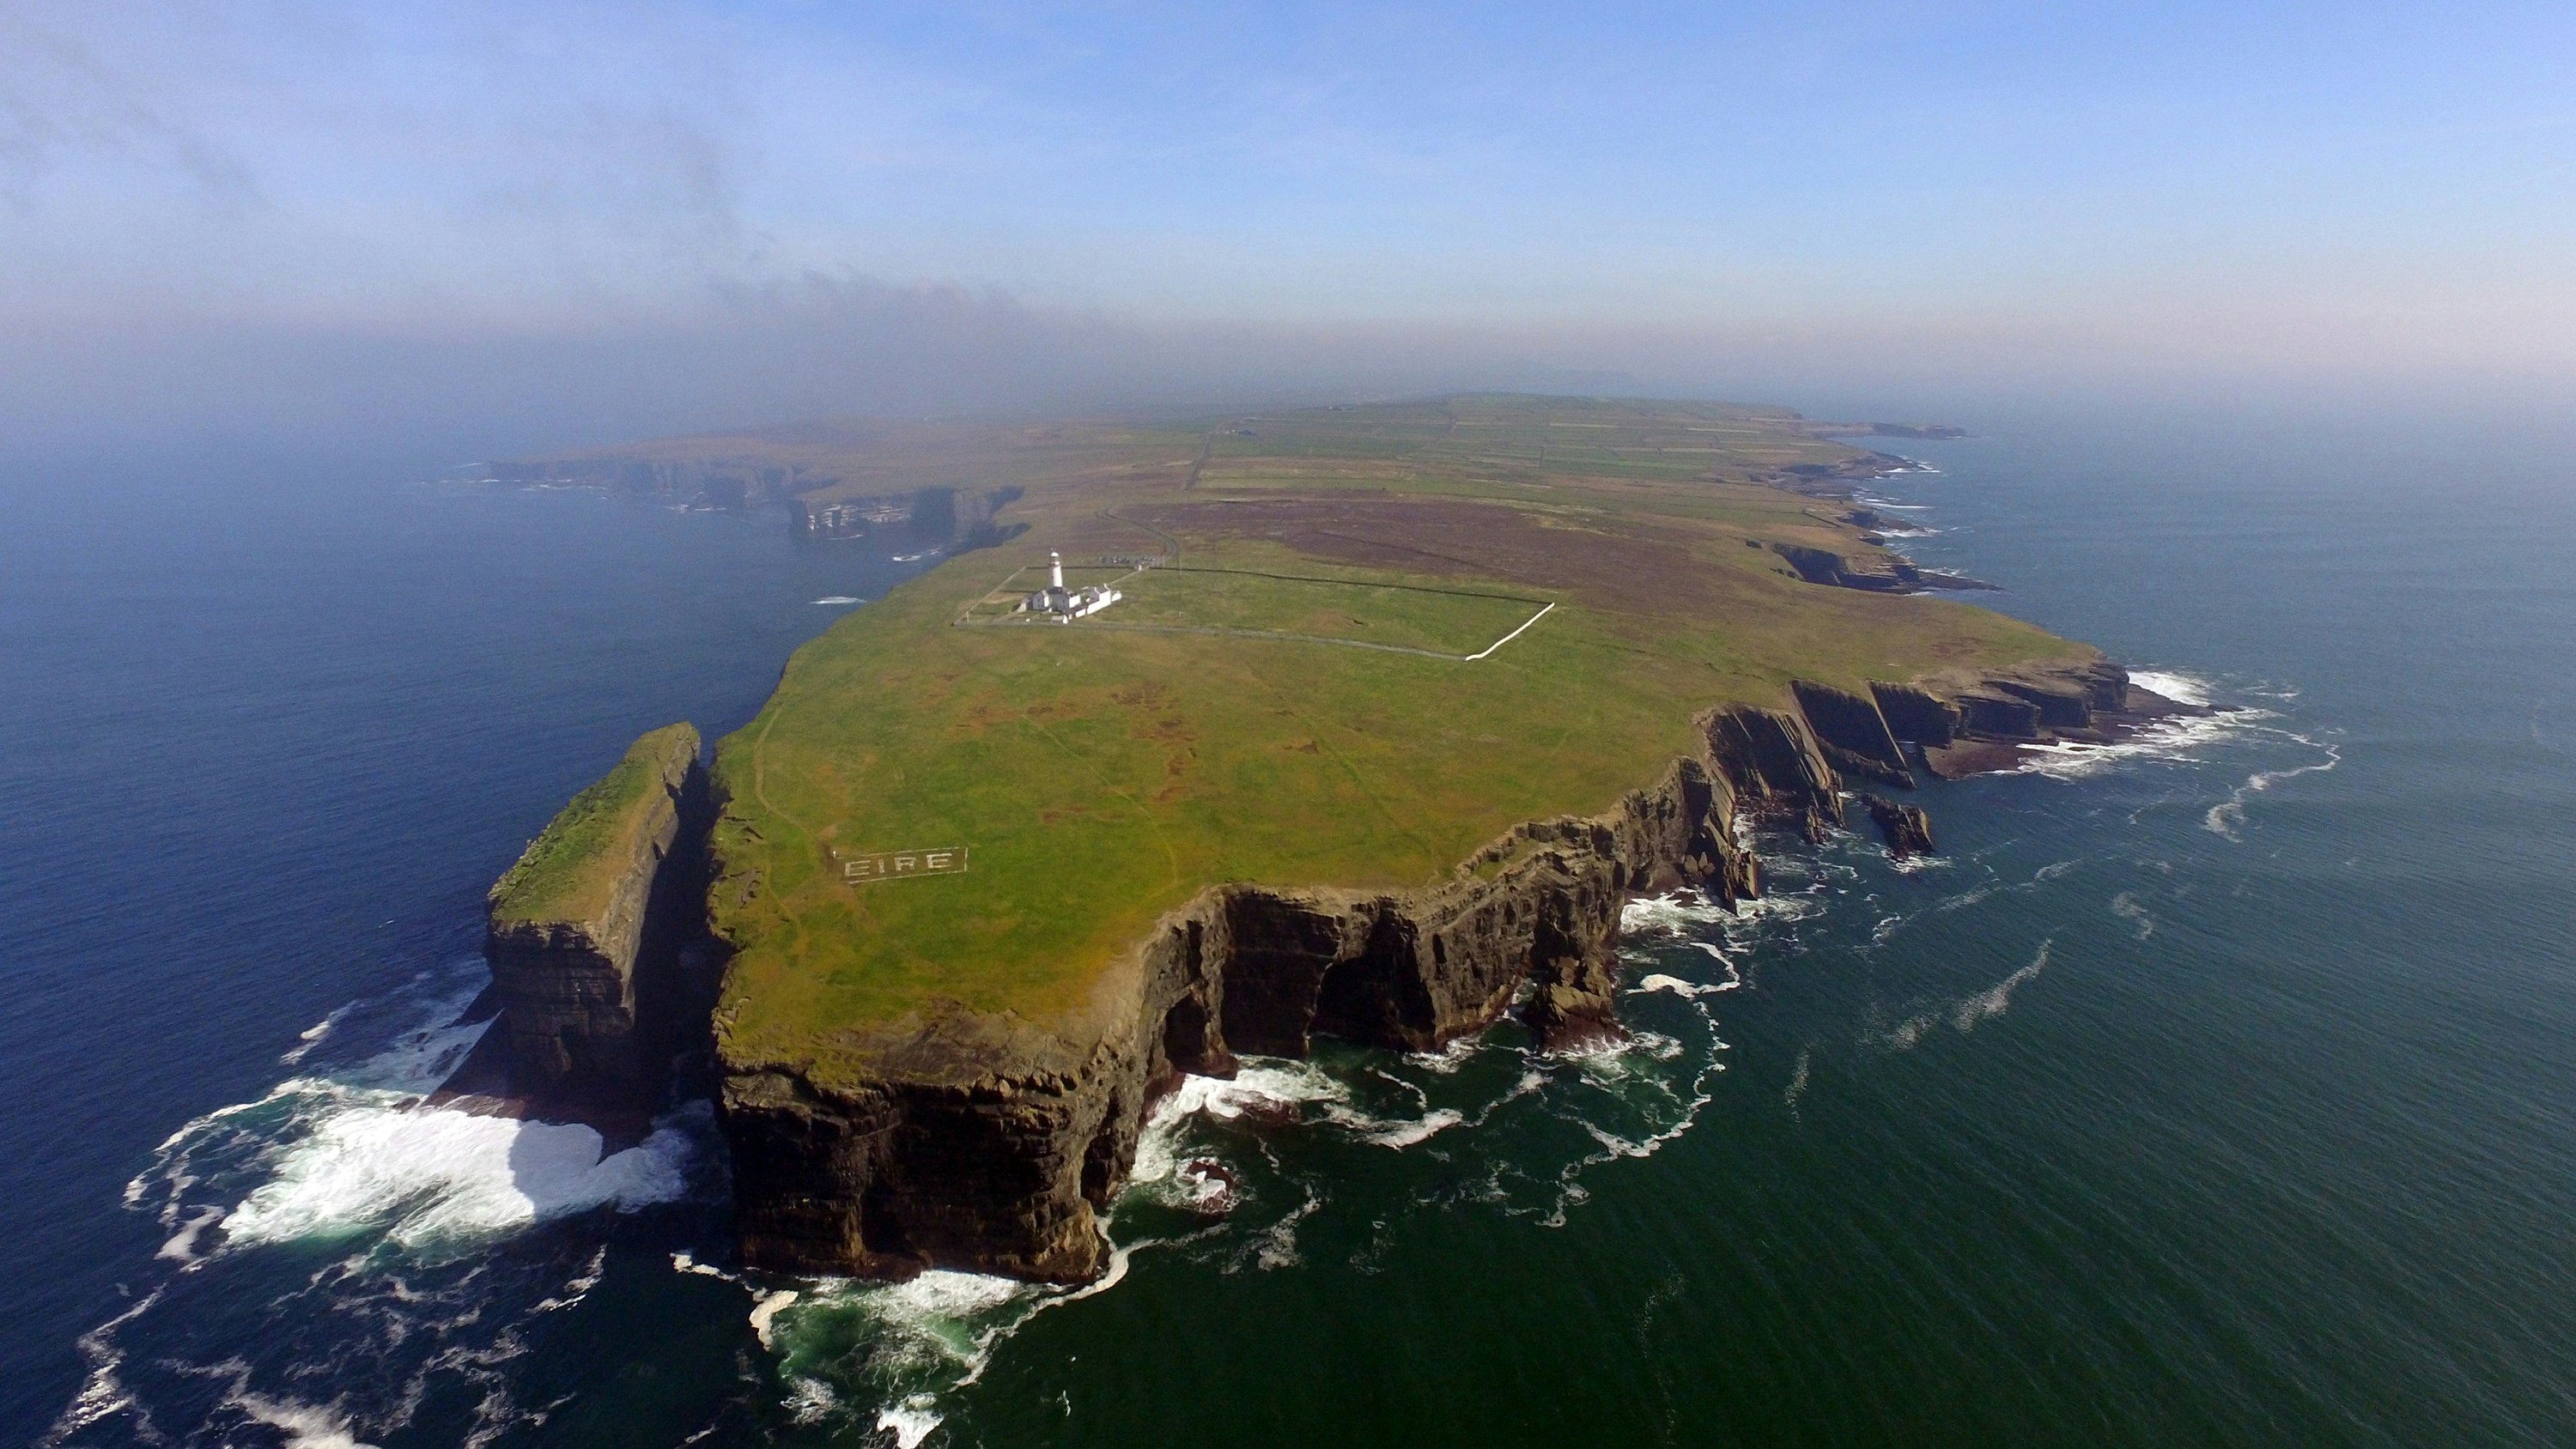 If you're looking for an adrenalin rush, Loop Head Peninsula in Co. Clare is the place for you